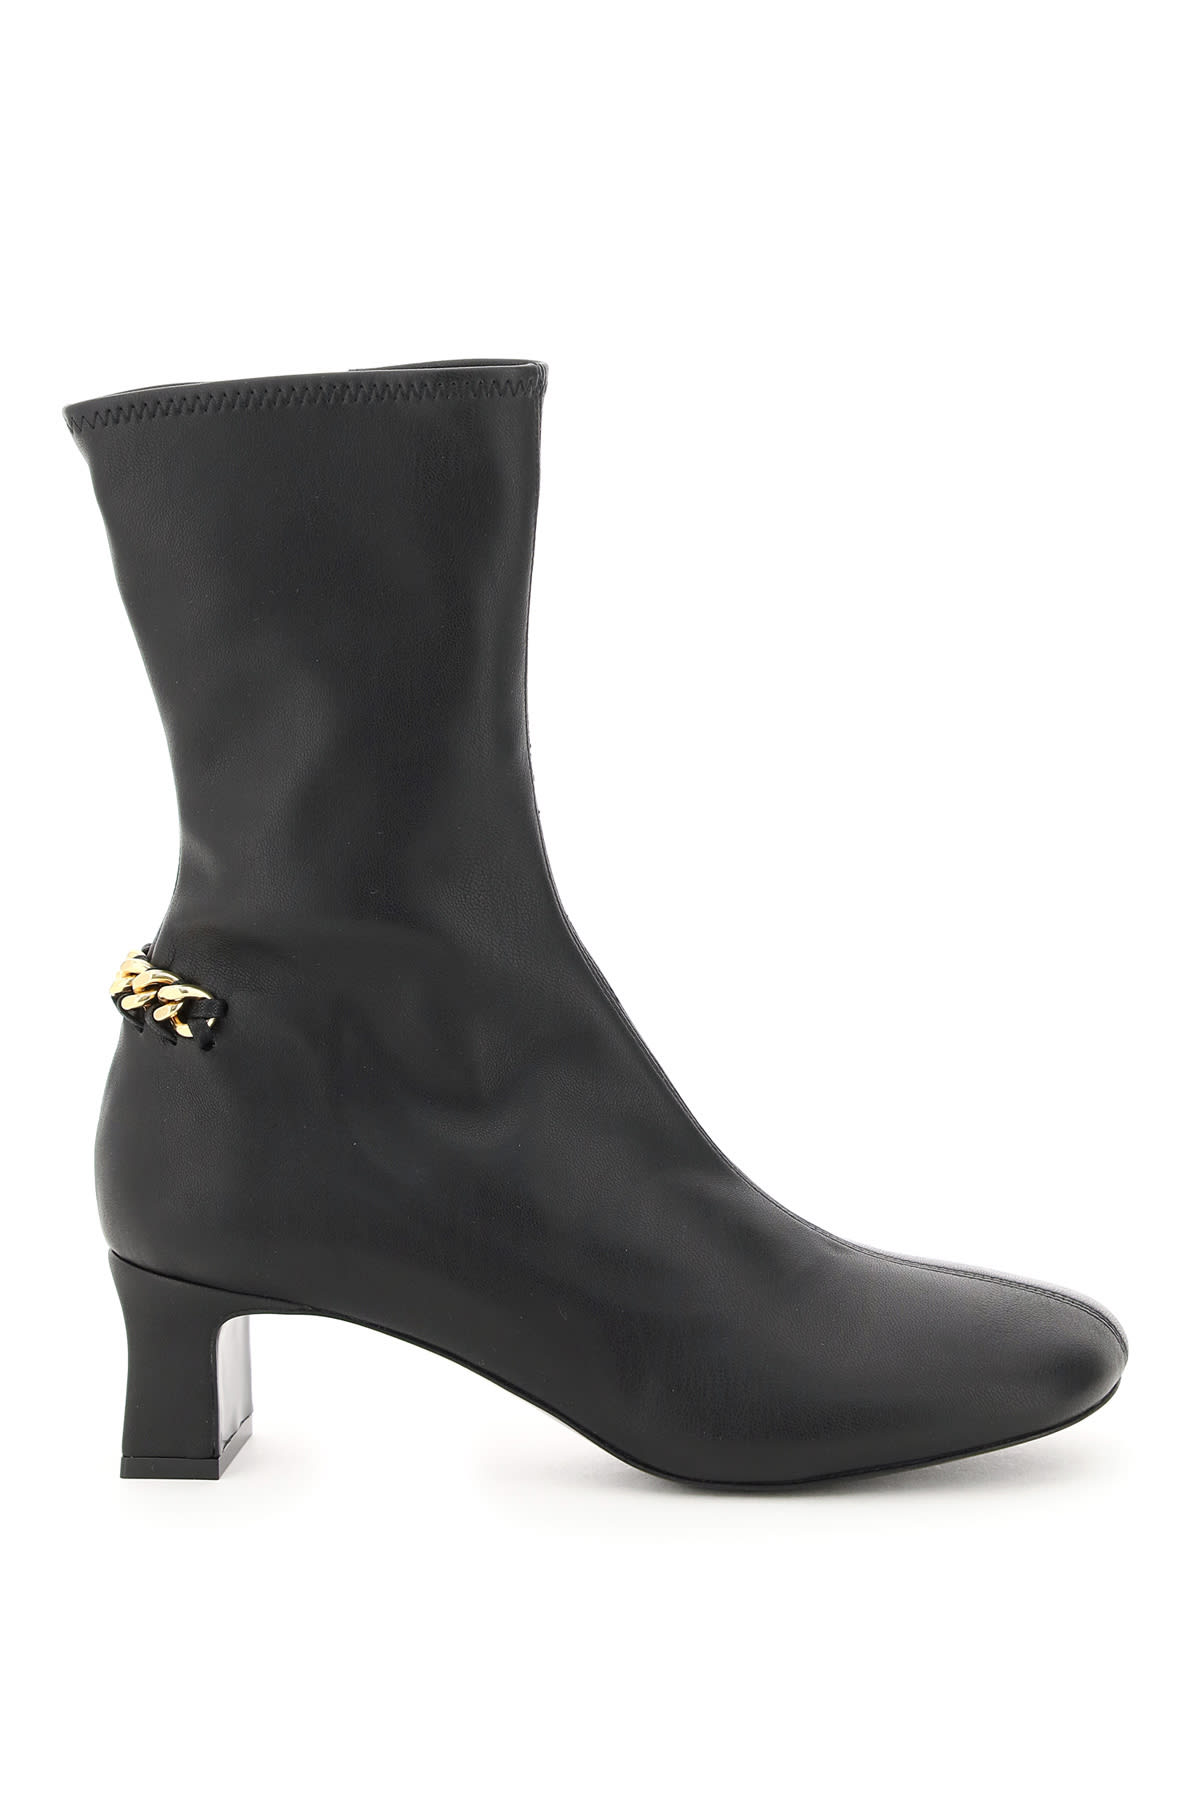 Stella McCartney Stretch Ankle Boots With Chain